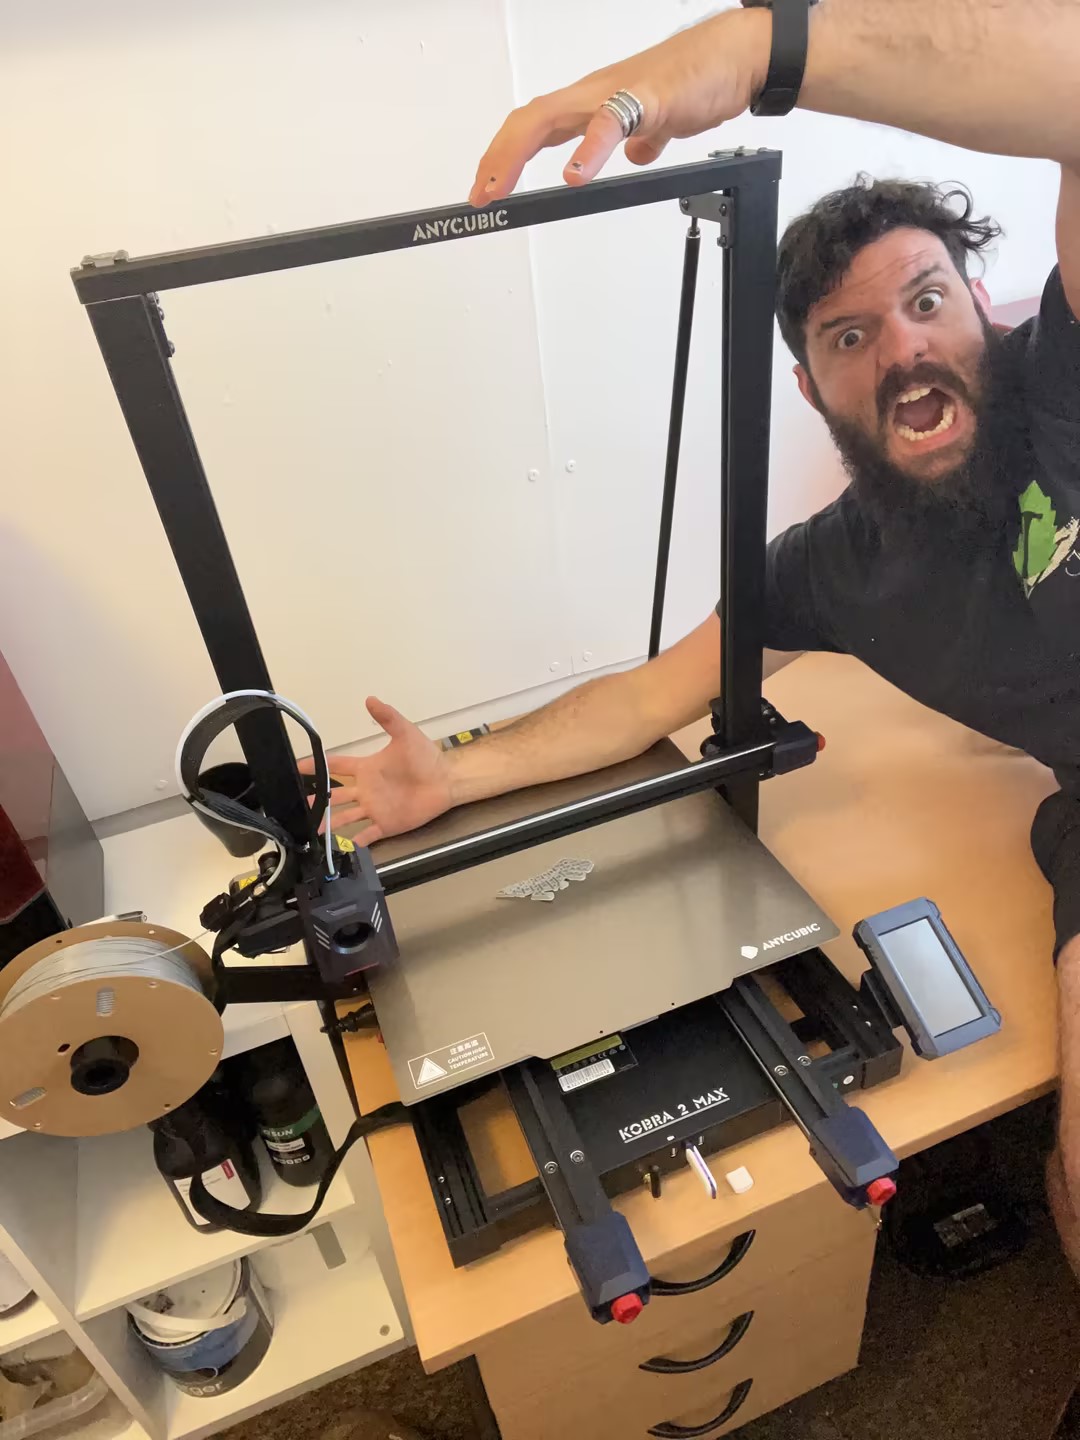 ANYCUBIC on X: Blown away by the Anycubic Kobra 2 Max's 88L